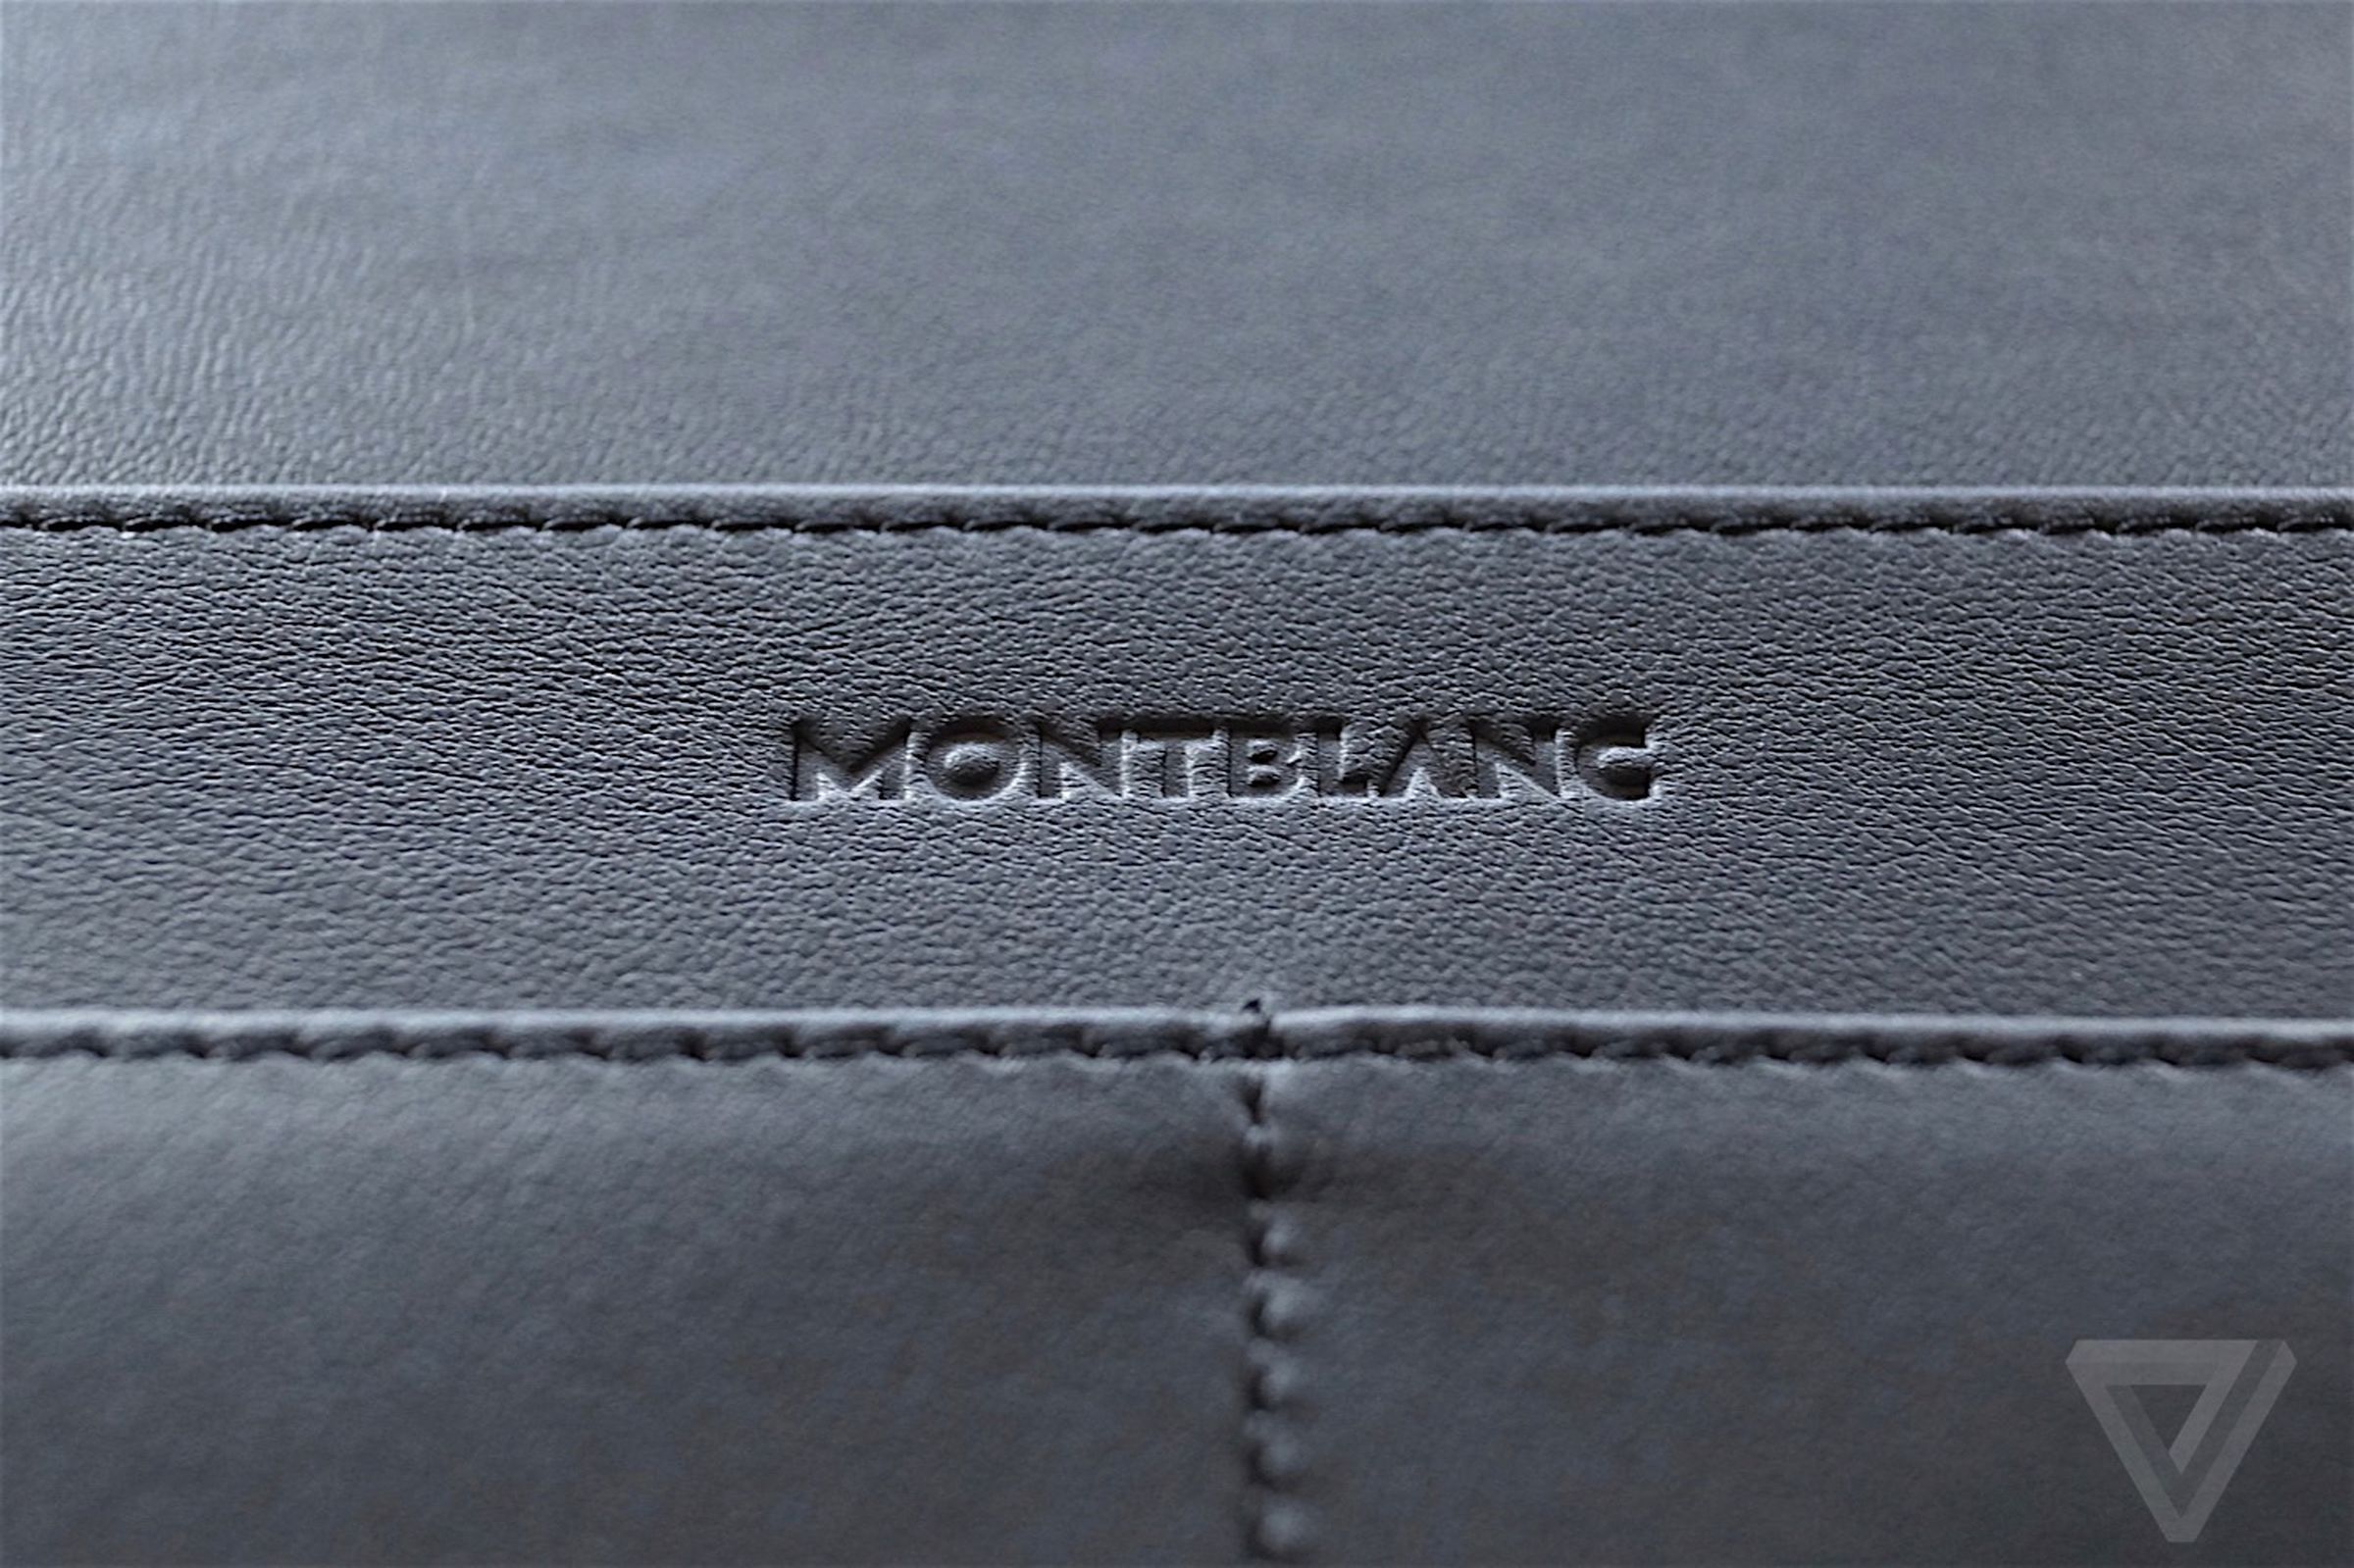 Montblanc Augmented Paper hands on gallery